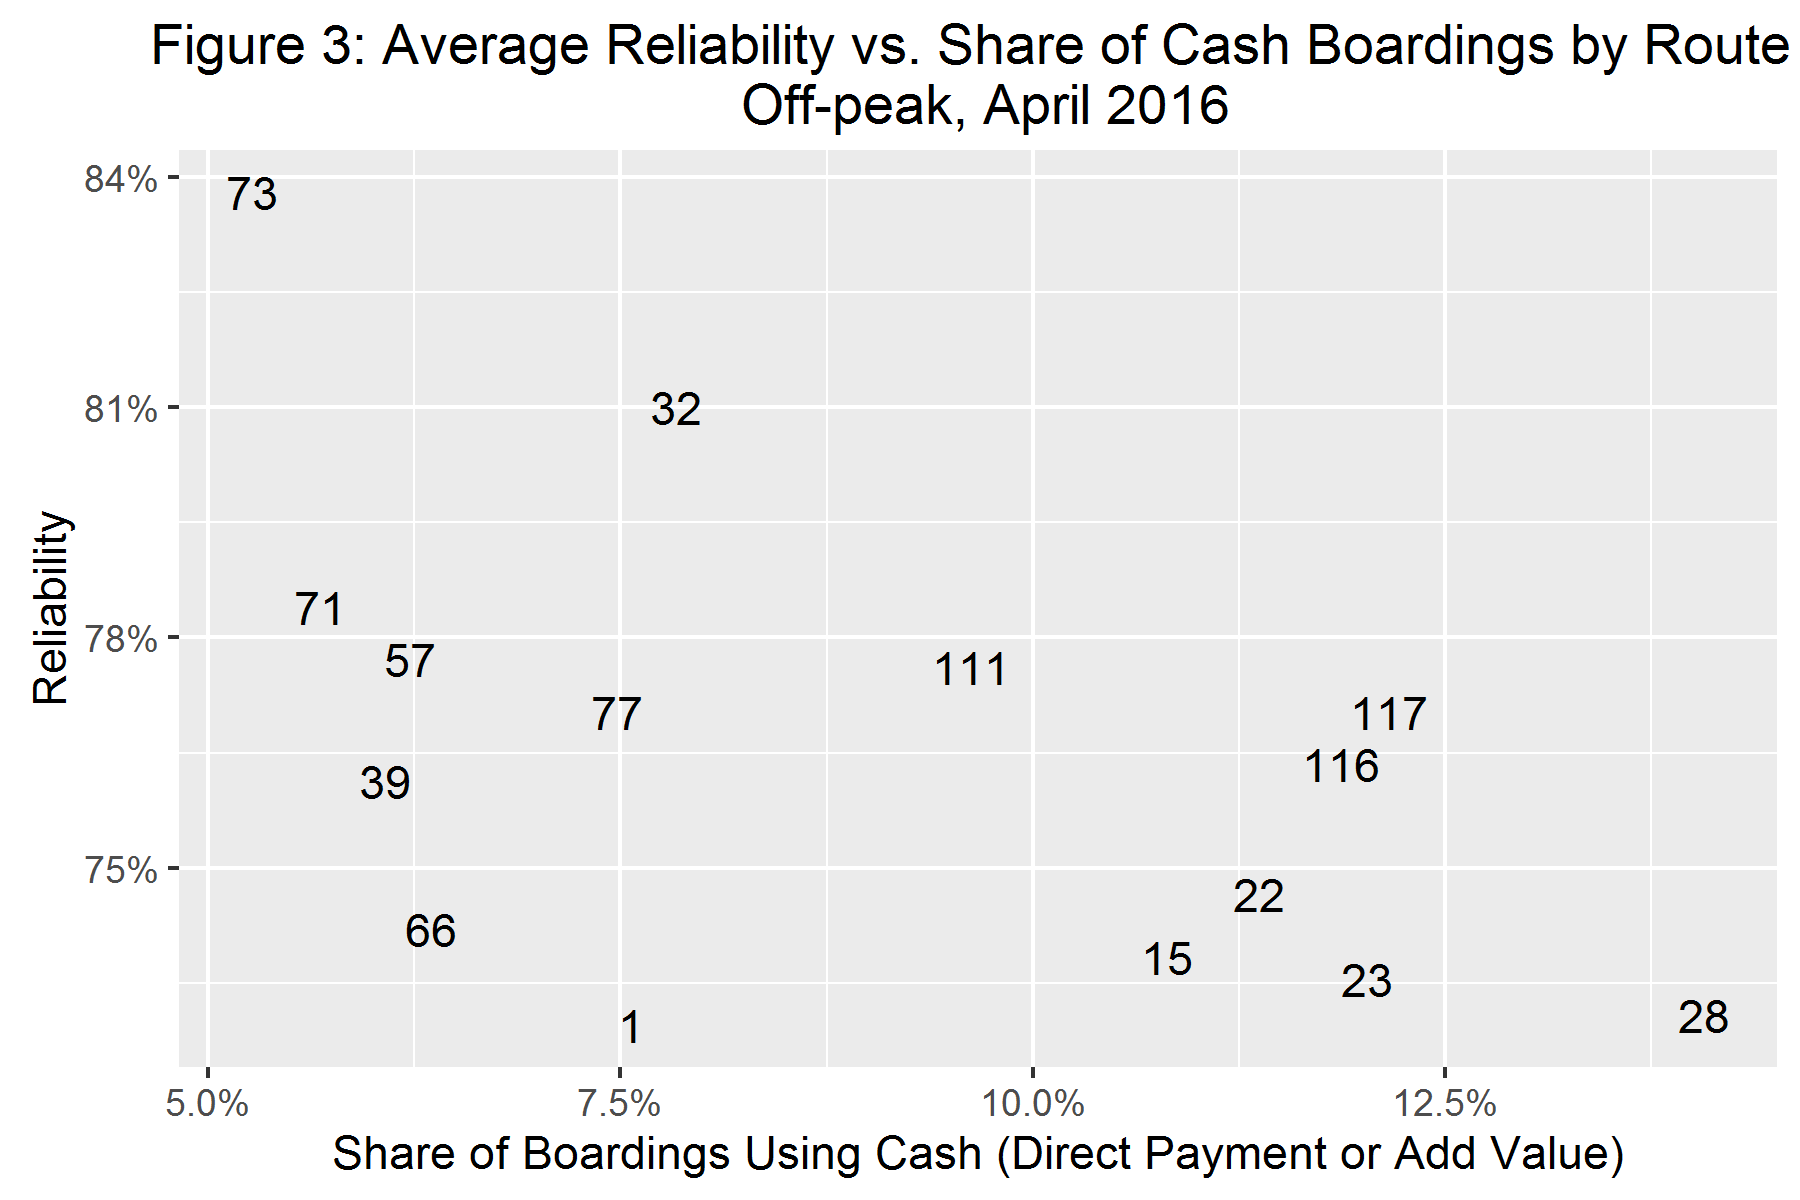 Reliability by share of boardings using cash by route